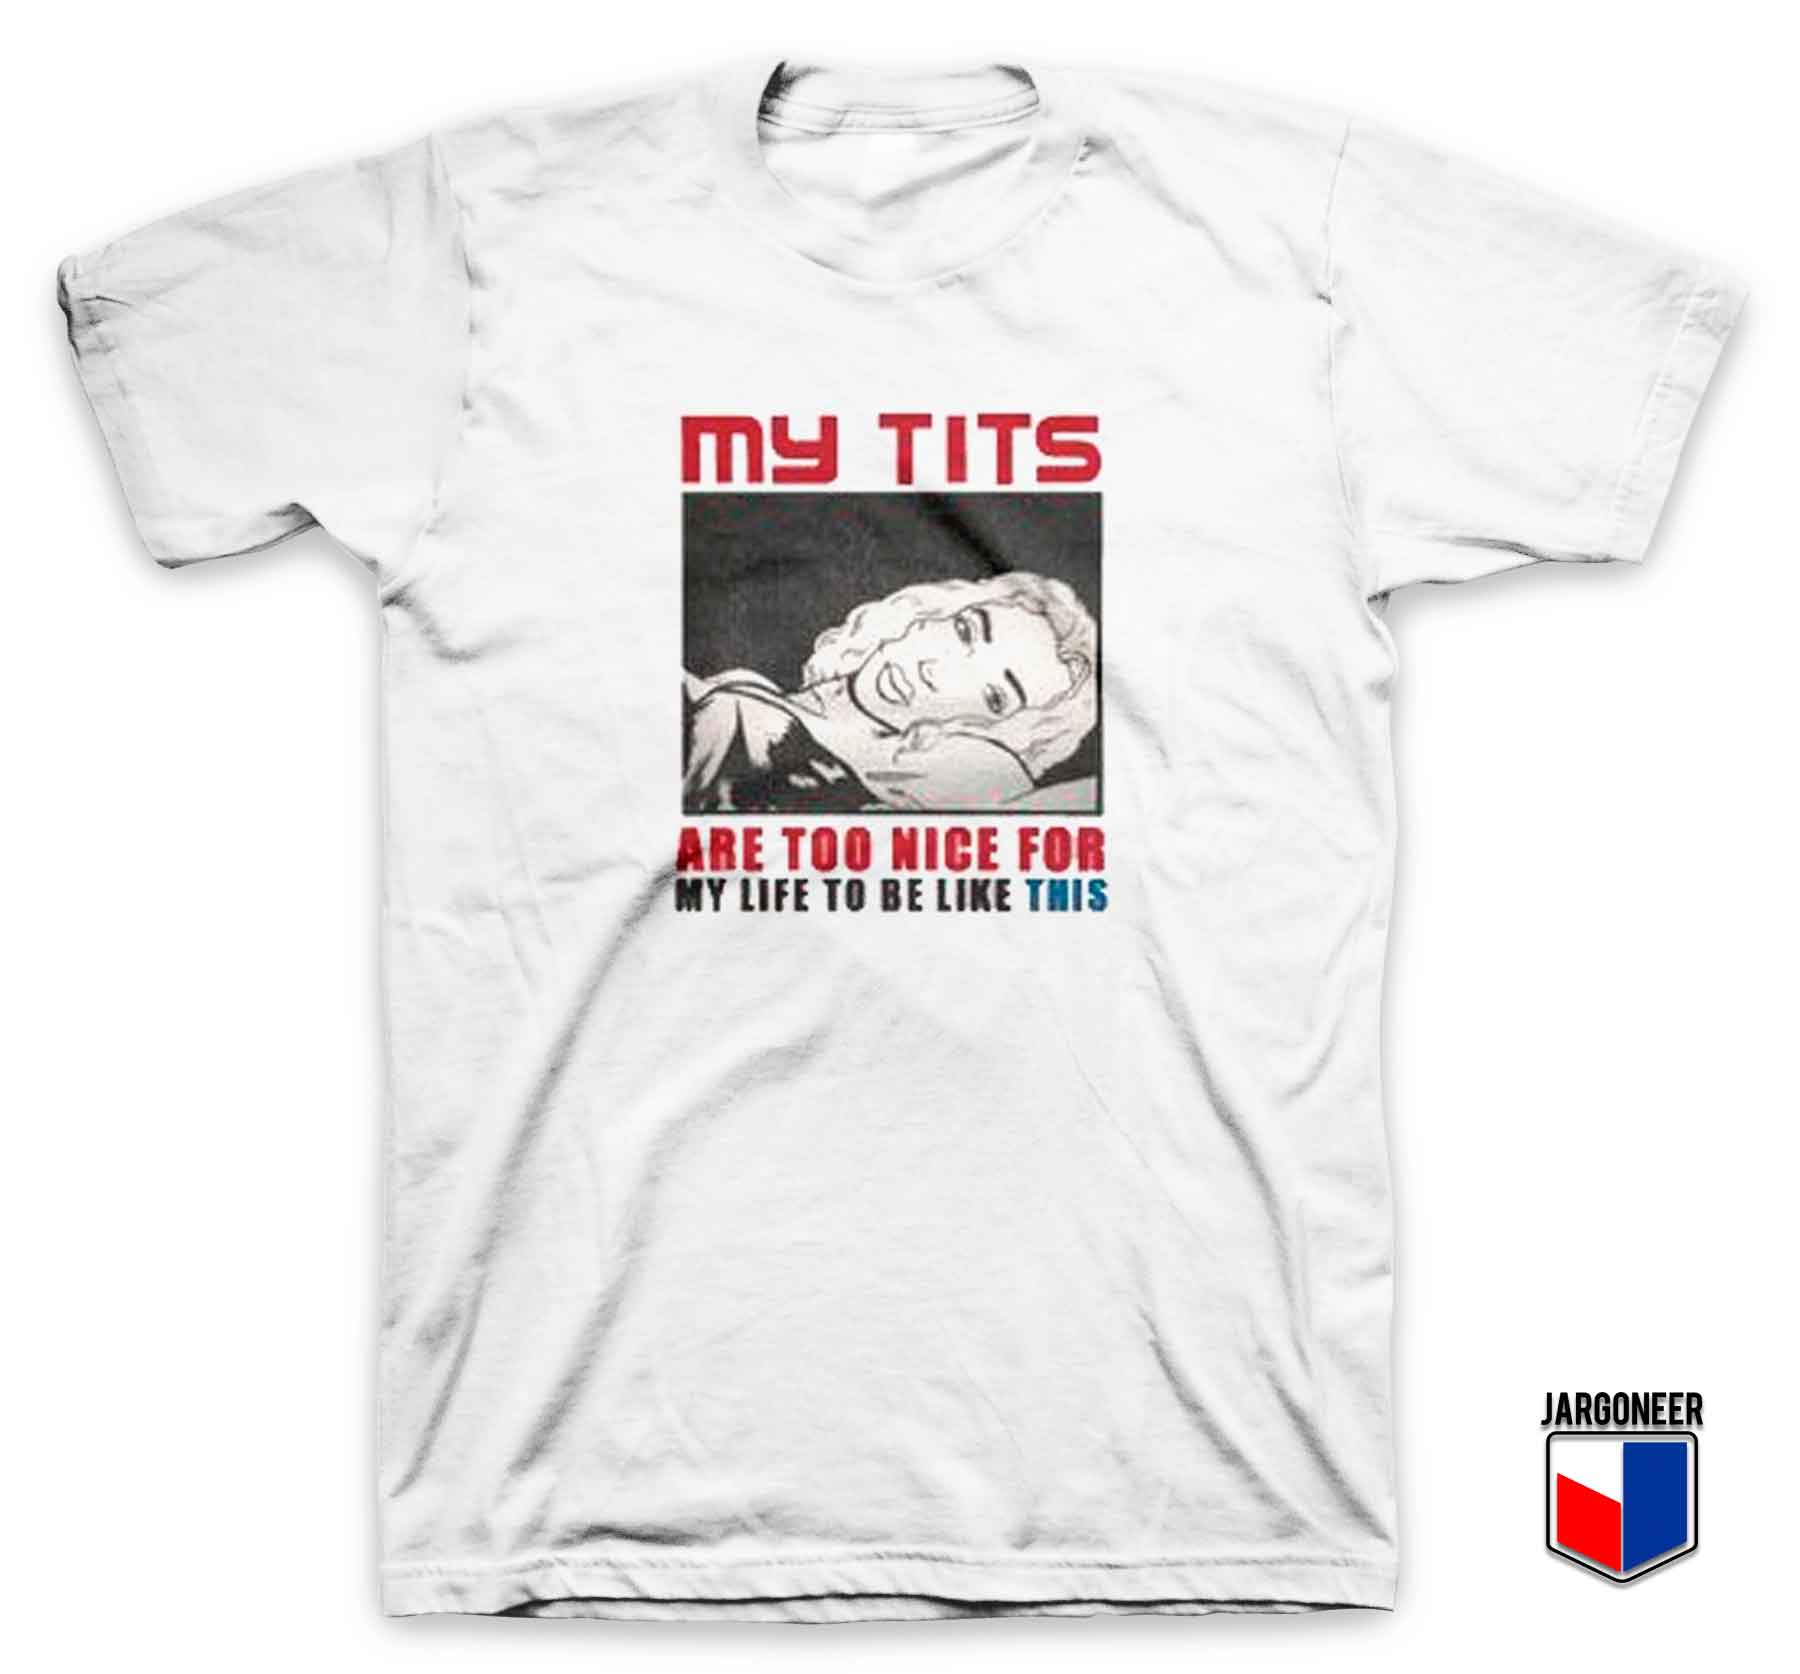 My Tits Are Too Nice - Shop Unique Graphic Cool Shirt Designs